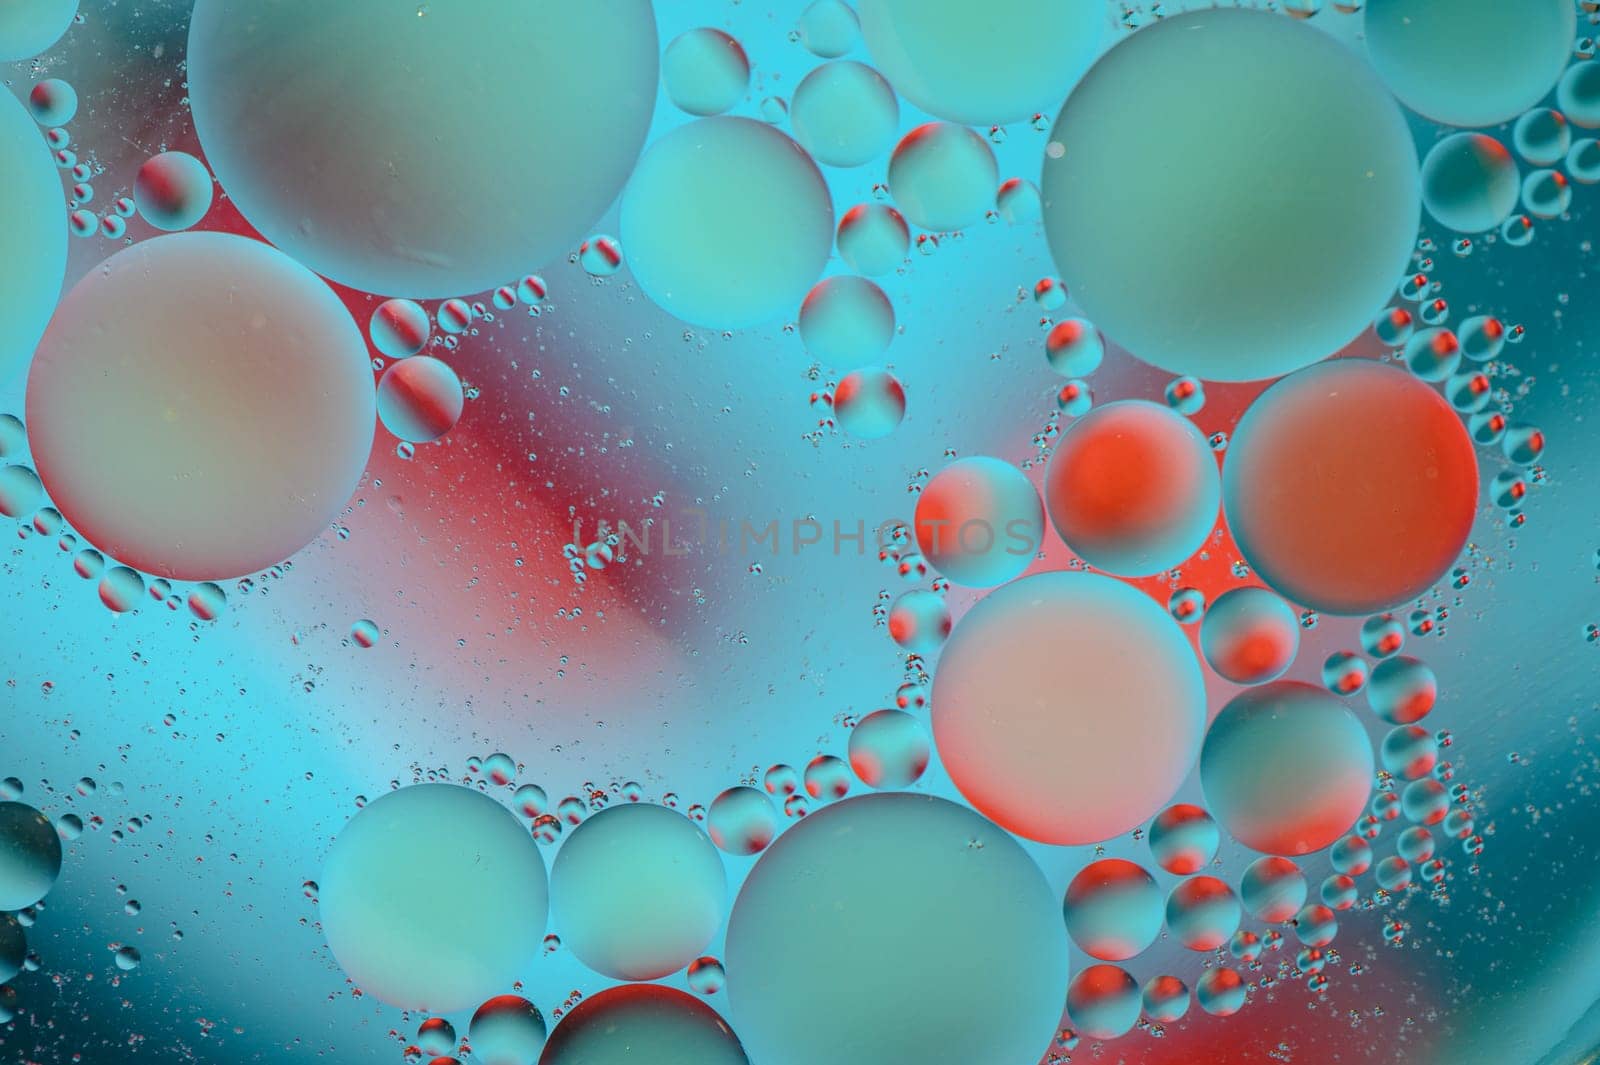 abstract background of multi-colored spots and circles microcosm universe galaxy 8